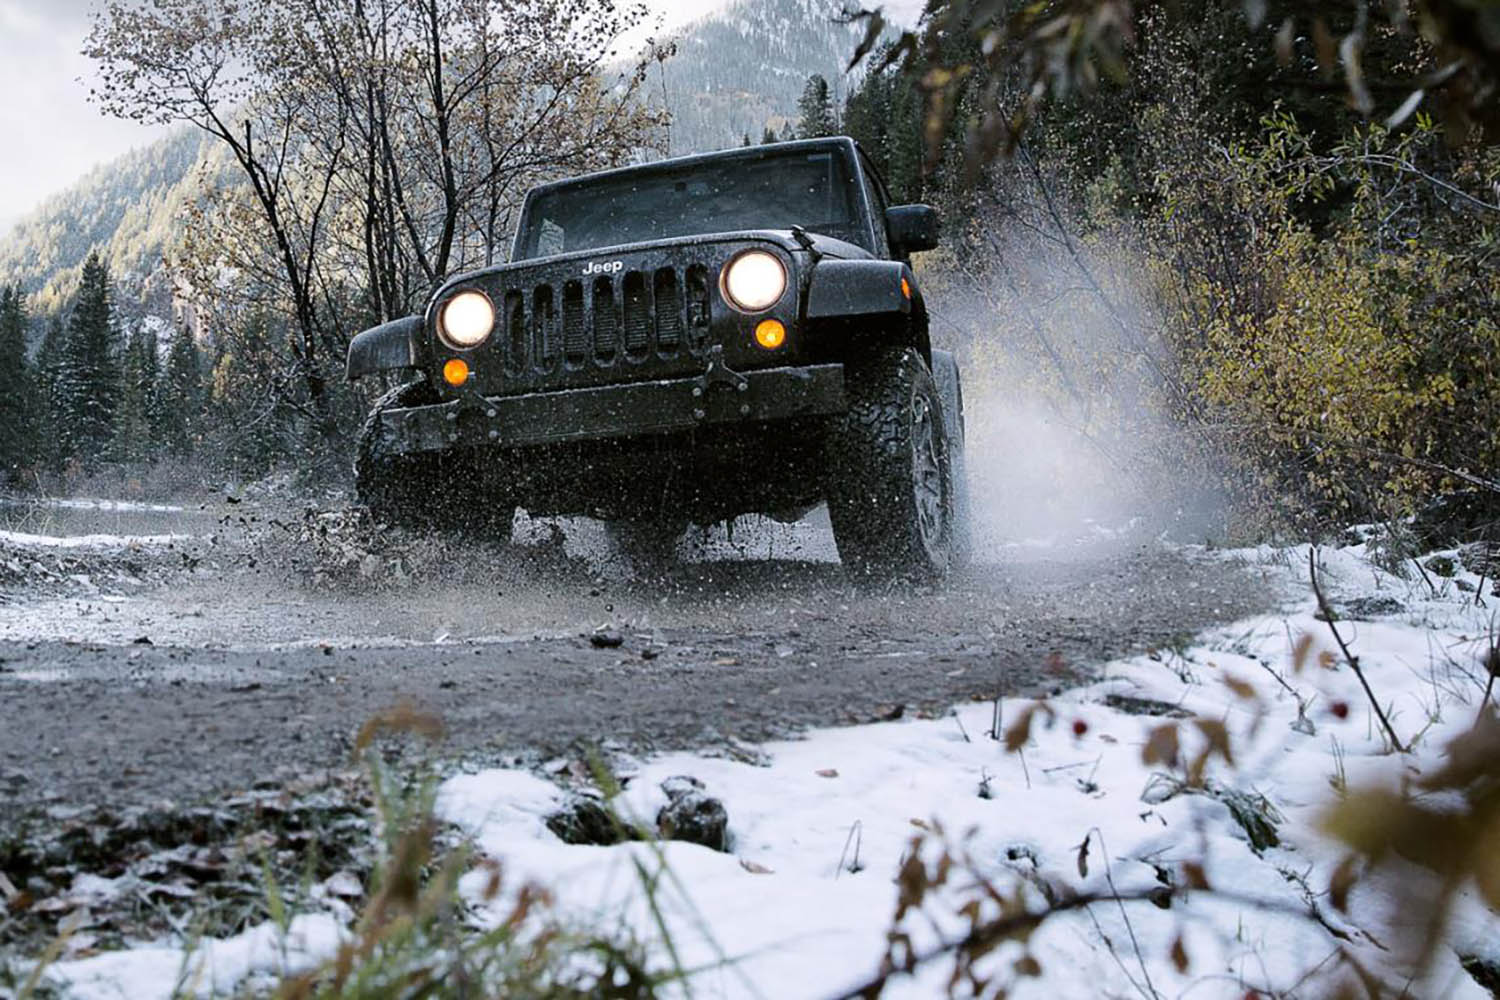 Jeep Wrangler with BFGoodrich all-terrain tires on a snowy road